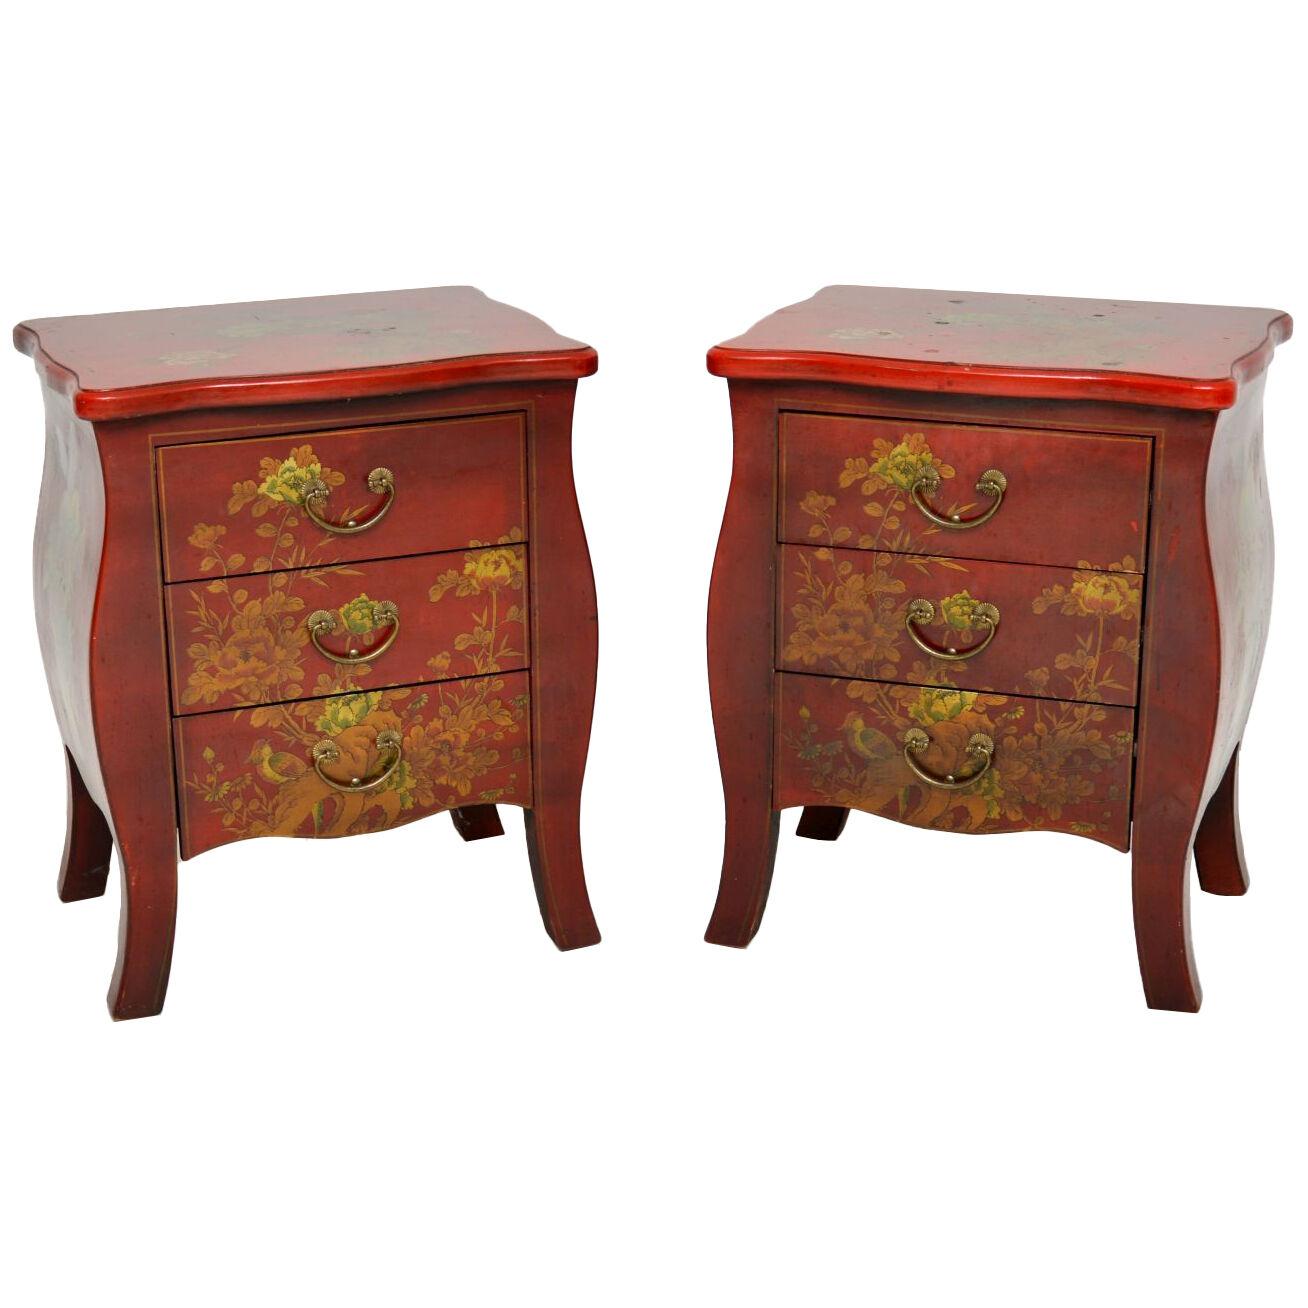 Pair of Antique Lacquered Chinoiserie Bedside Chests